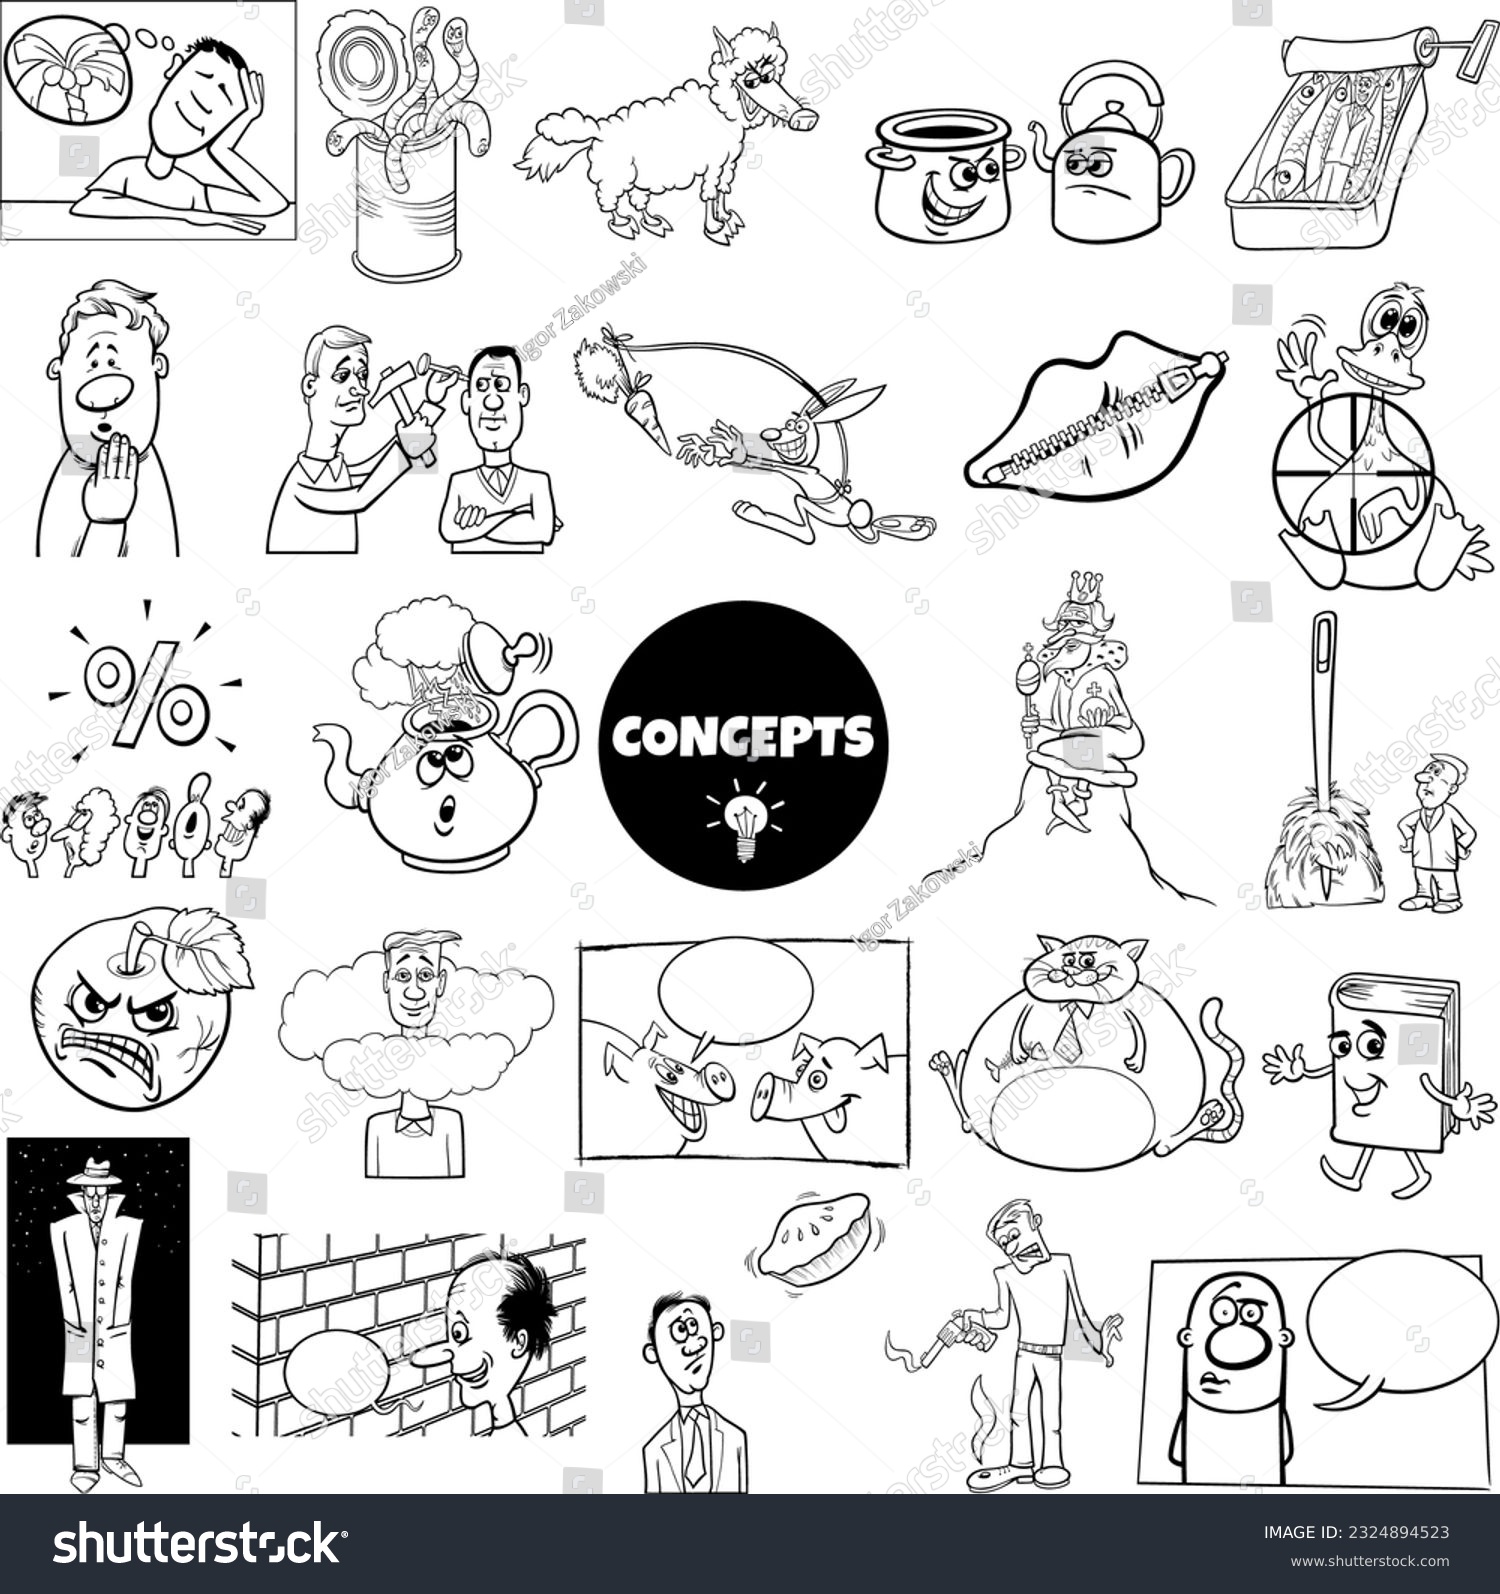 SVG of Black and white ilustration set of humorous cartoon concepts or metaphors and ideas with comic characters svg